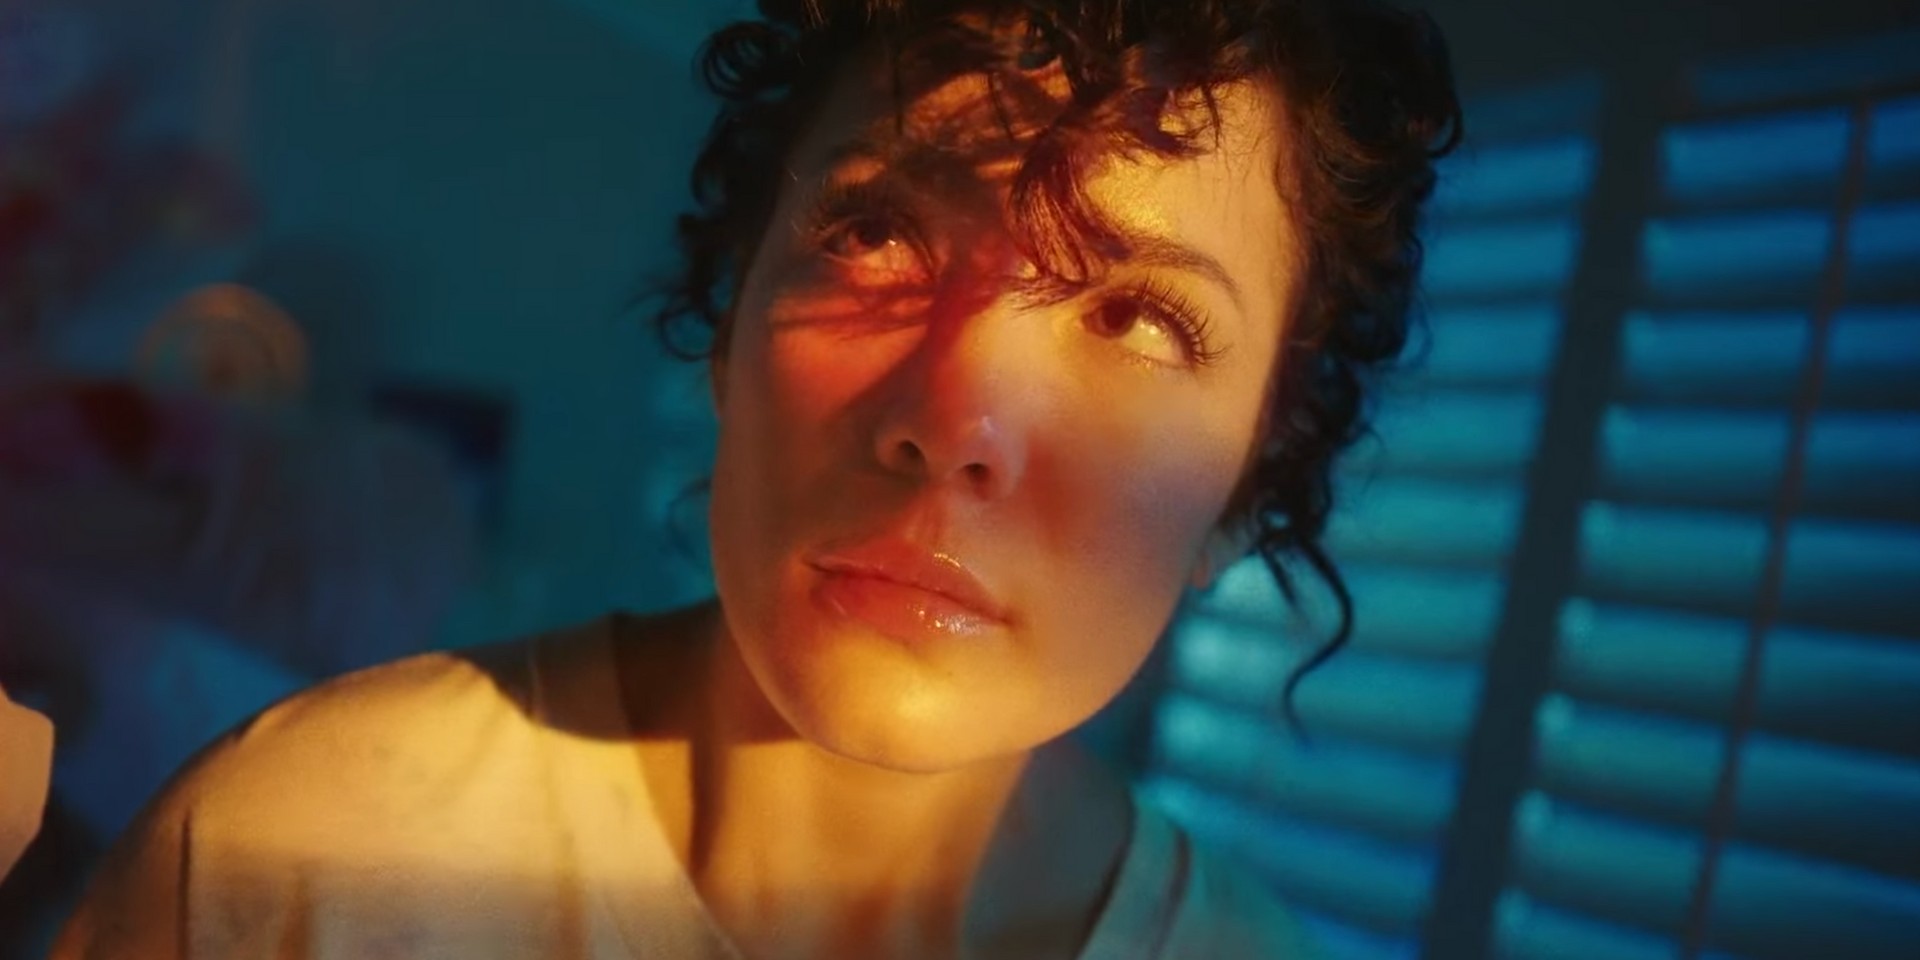 Halsey unveils whimsical new video for 'Graveyard'